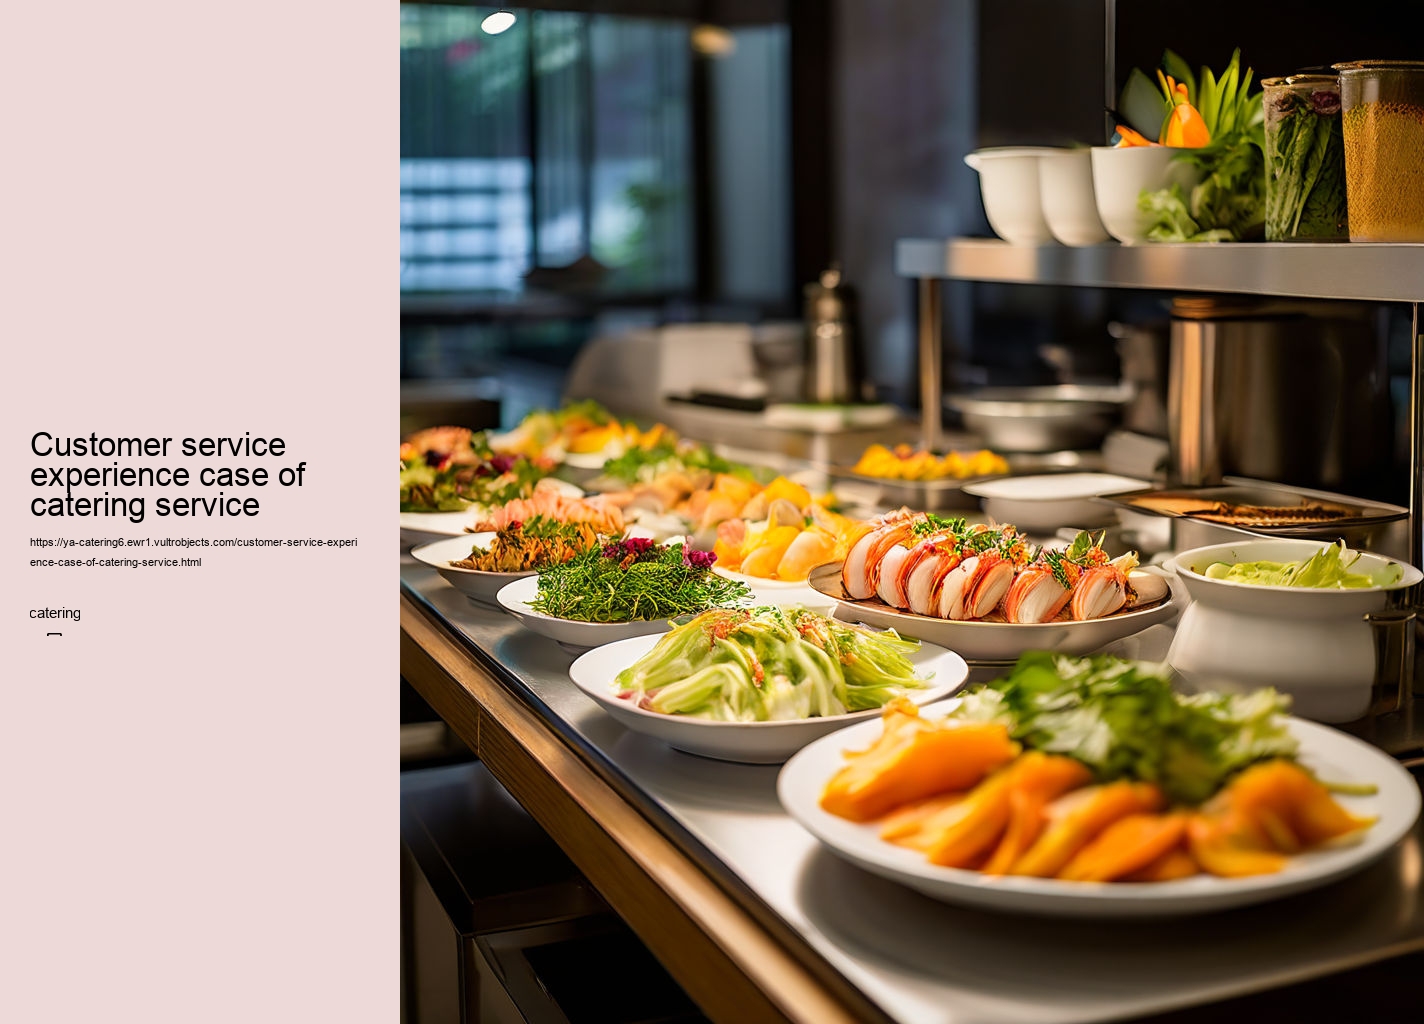 Customer service experience case of catering service